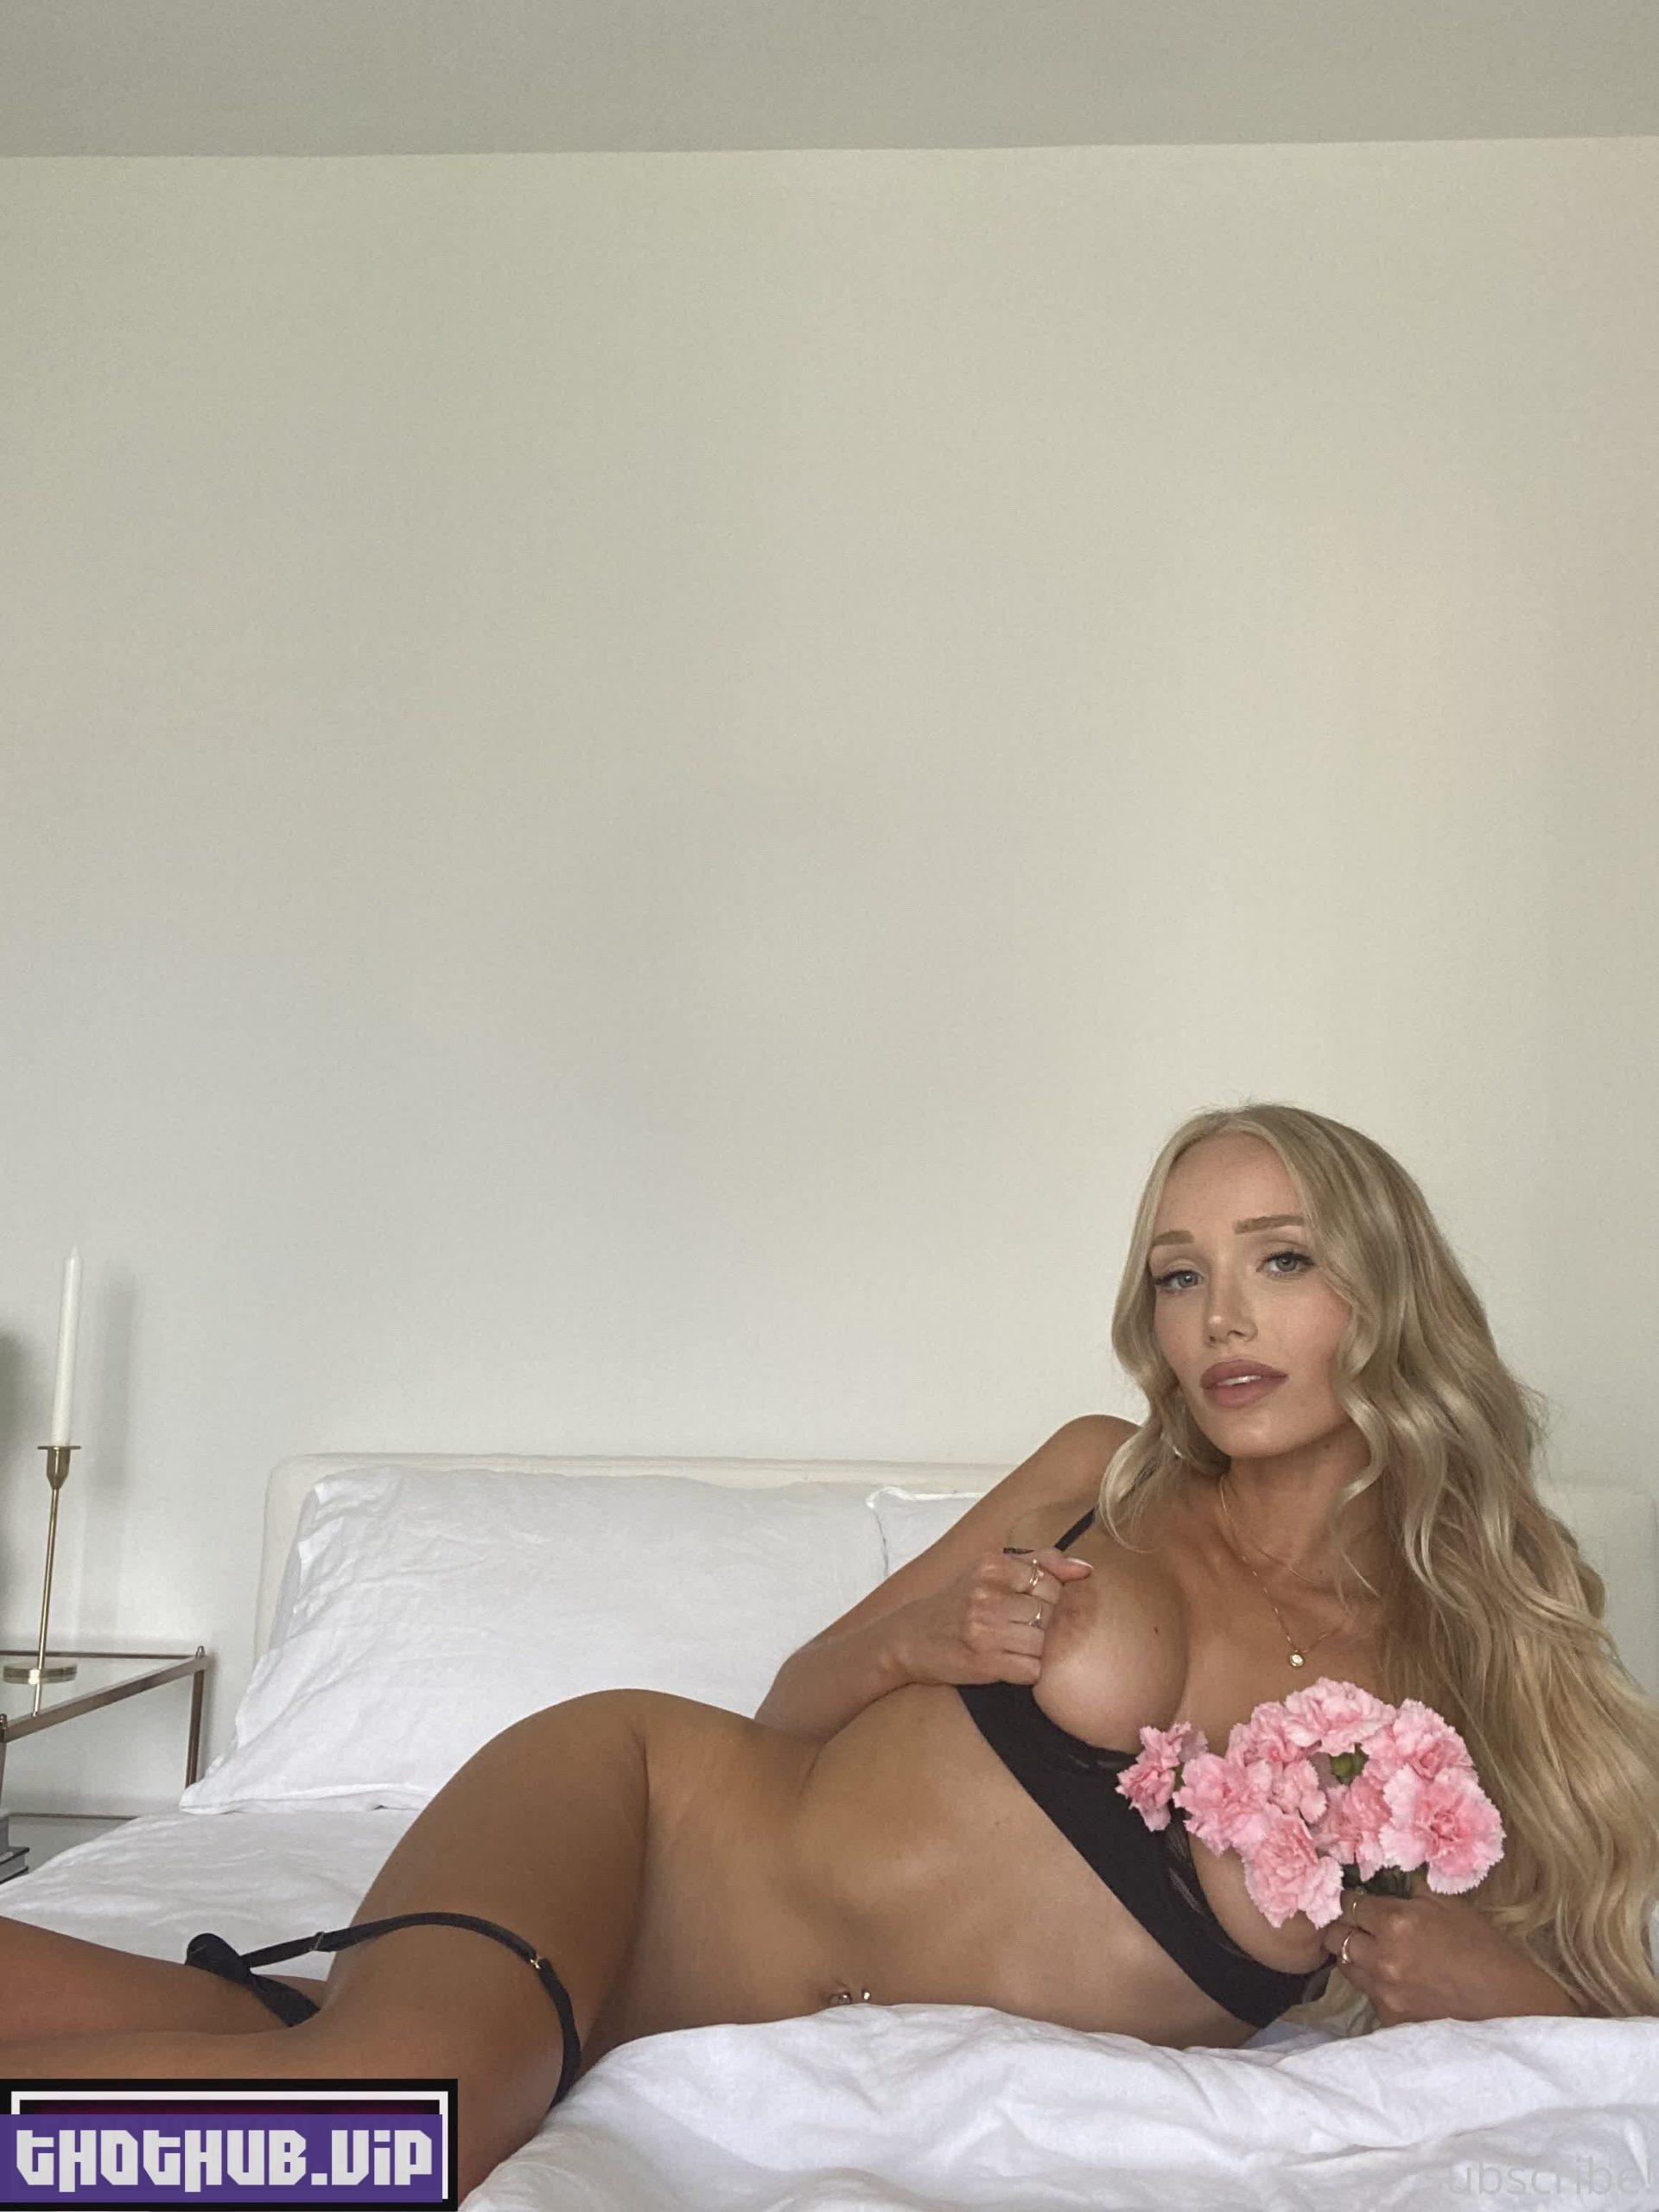 1689069270 37 Gwengwiz %E2%80%93 Busty Blonde Onlyfans Sextapes Nudes